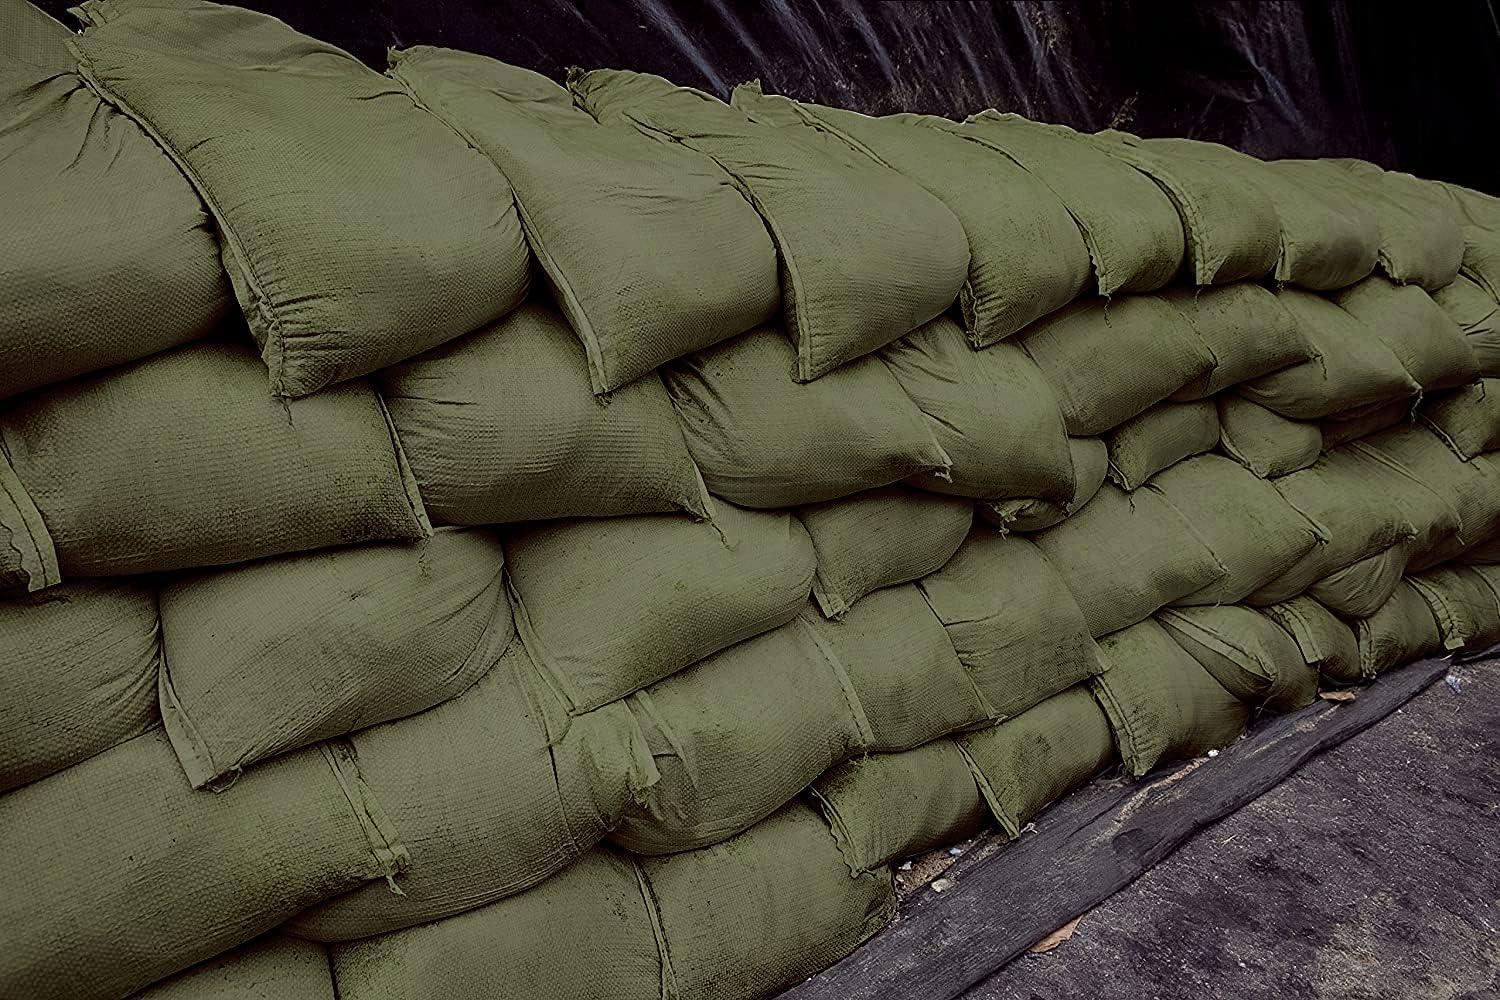 Empty Sandbags Military Green with Ties (Available in Various Bundles) 14 x  26 - Woven Polypropylene Sand Bags, Sandbags for Hurricane Flooding, Sand  Bags Flood Protection 20